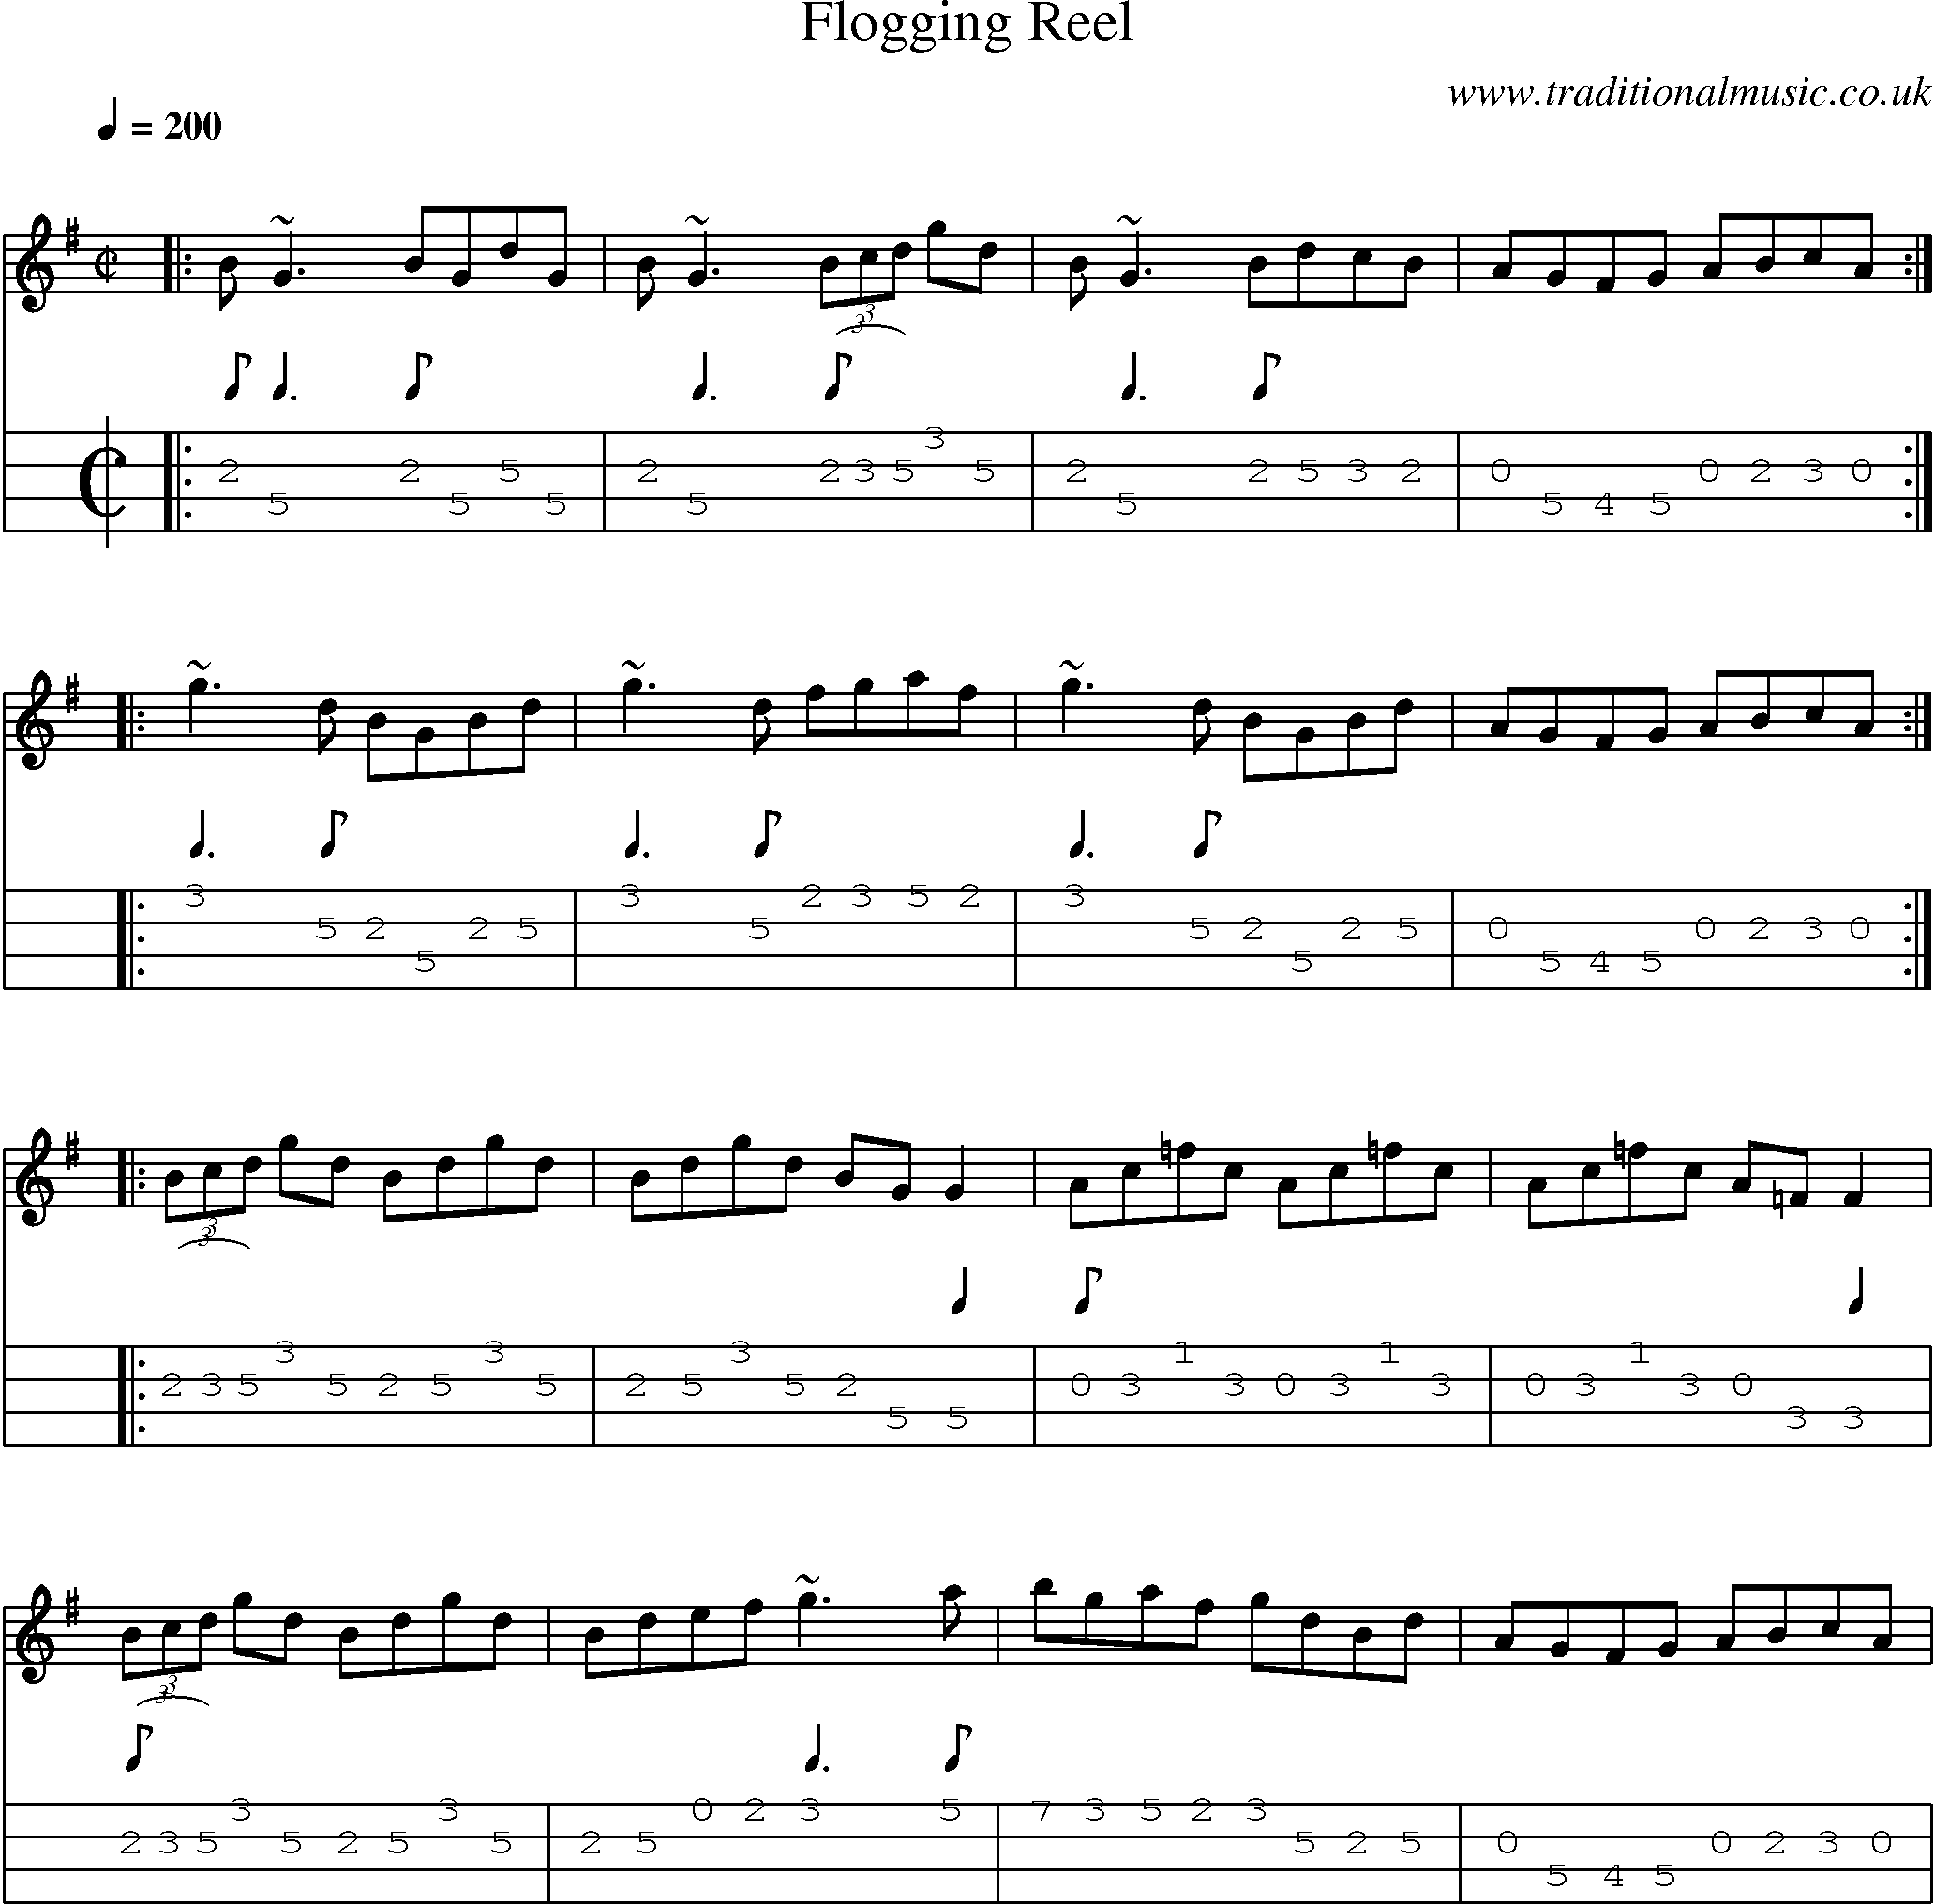 Music Score and Mandolin Tabs for Flogging Reel